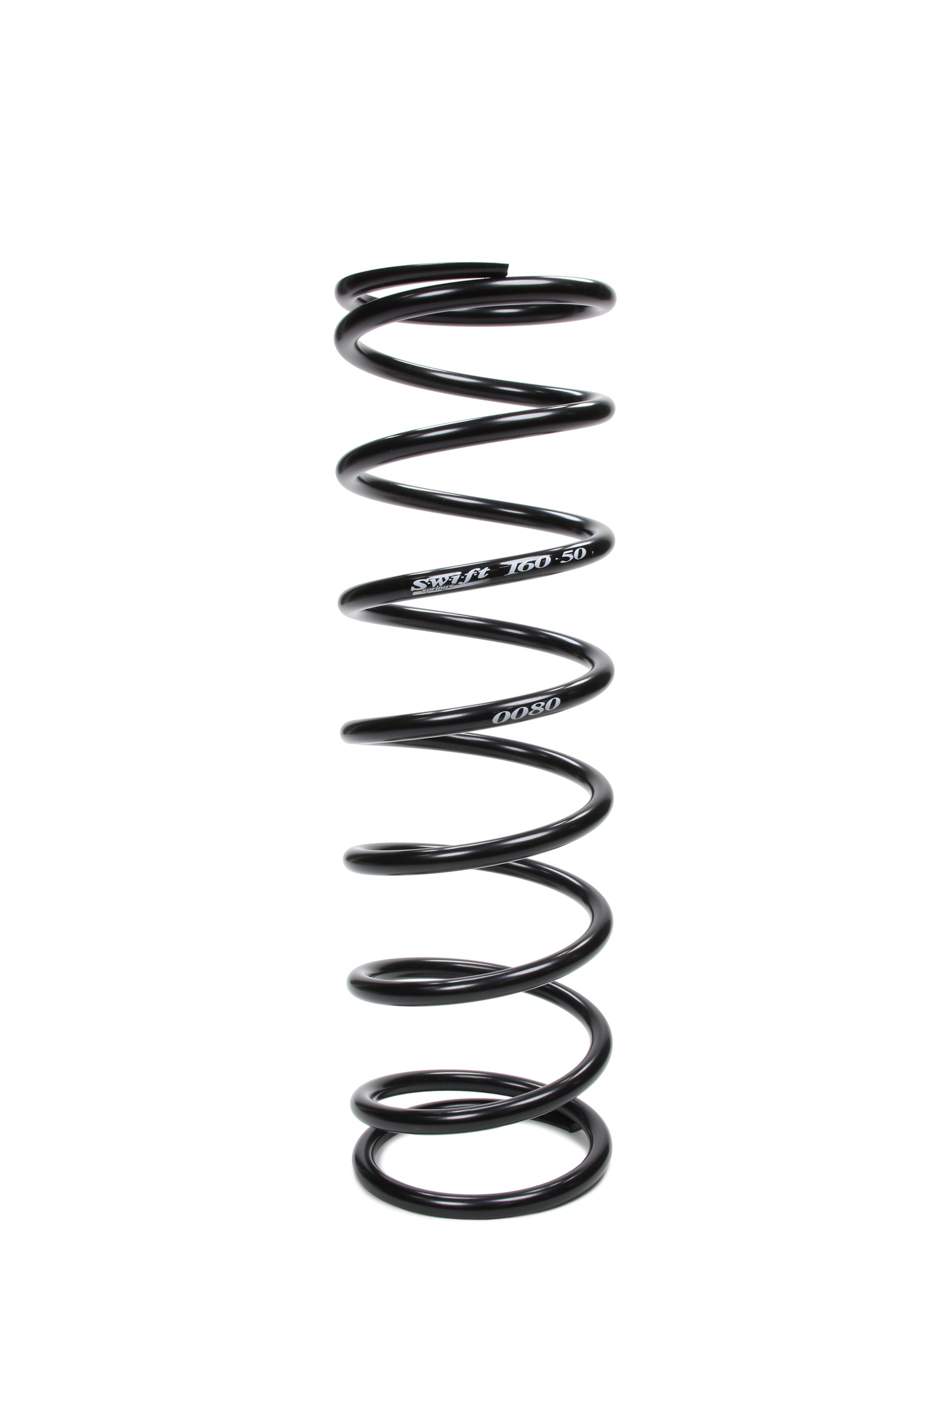 SWIFT SPRINGS 160-500-080 Conventional Spring 16in x 5in 80lb